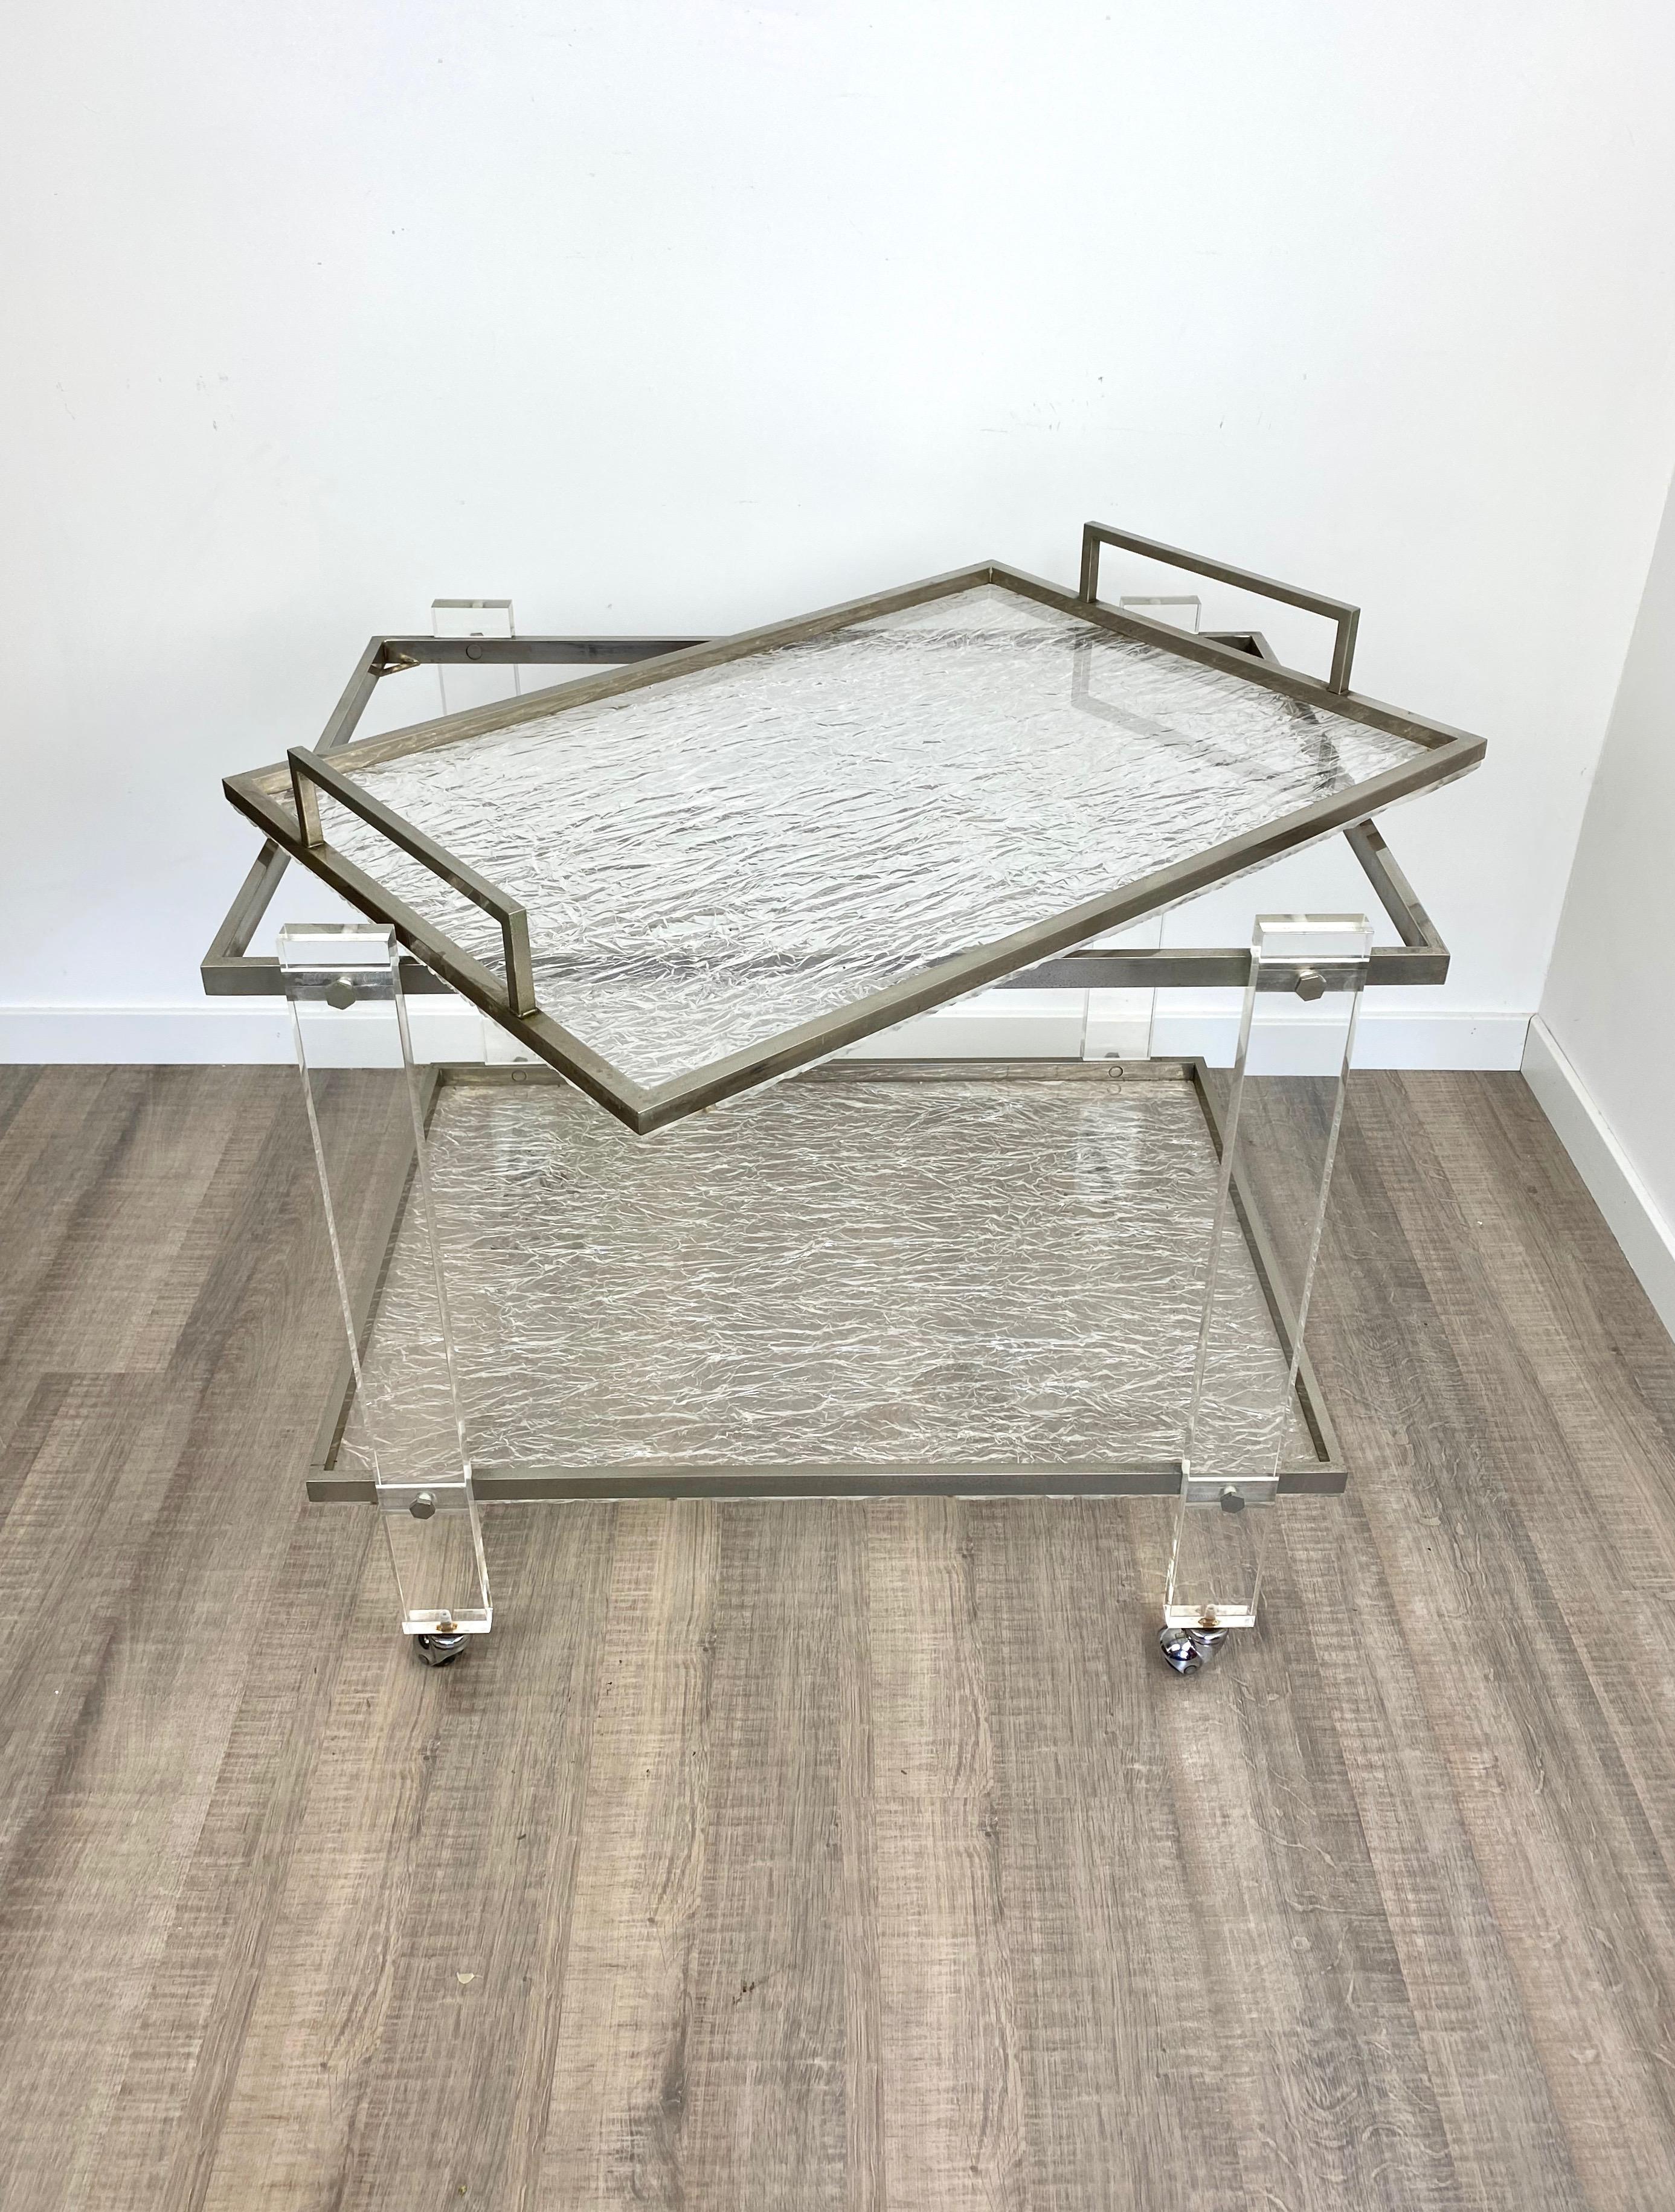 Serving cart trolley in nickel structure and ice effect Lucite shelves, one of which removable and usable as a tray, attributed to the Italian designer Willy Rizzo, circa 1970.